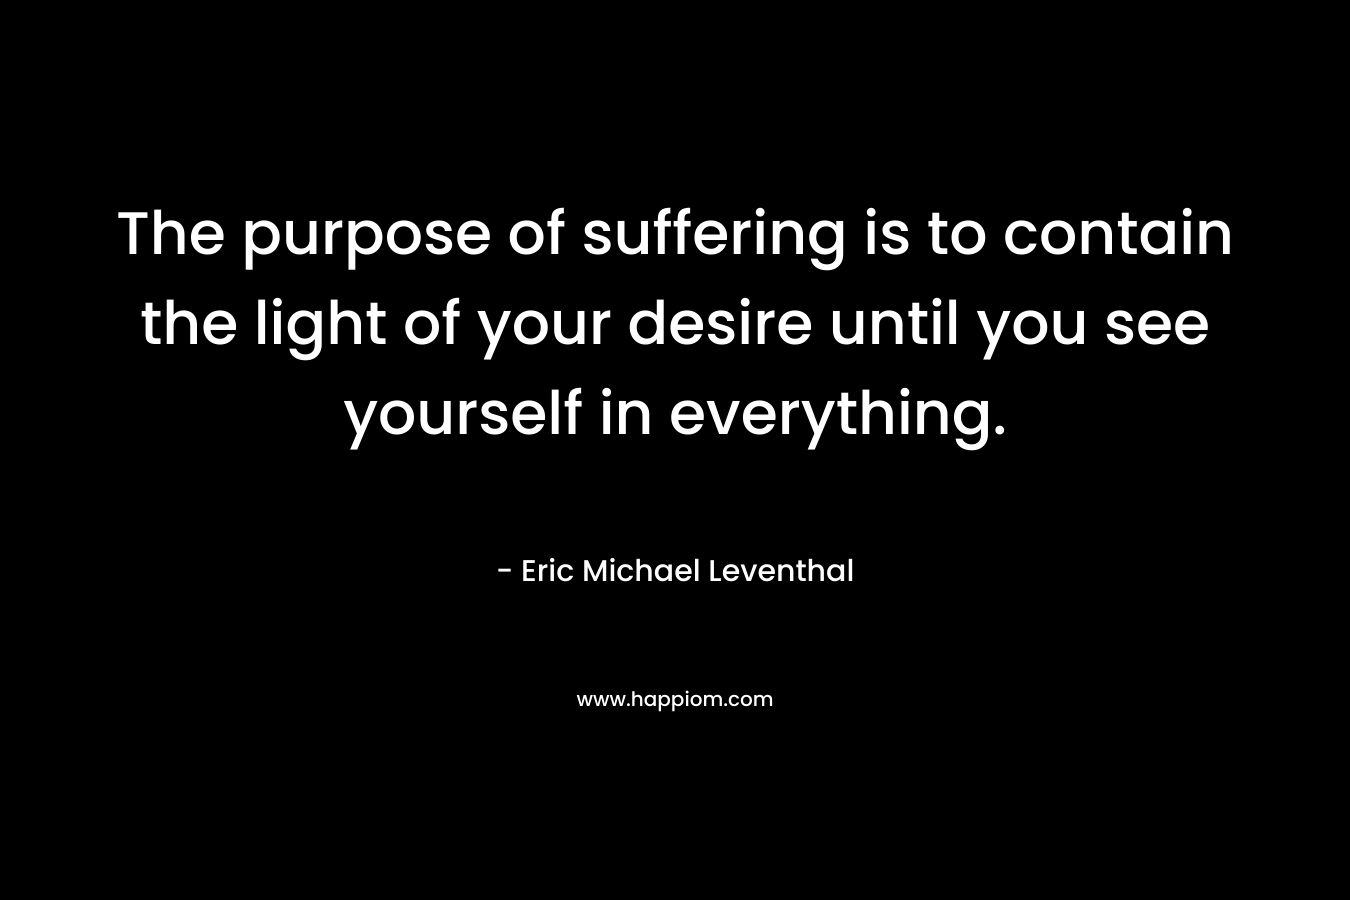 The purpose of suffering is to contain the light of your desire until you see yourself in everything.